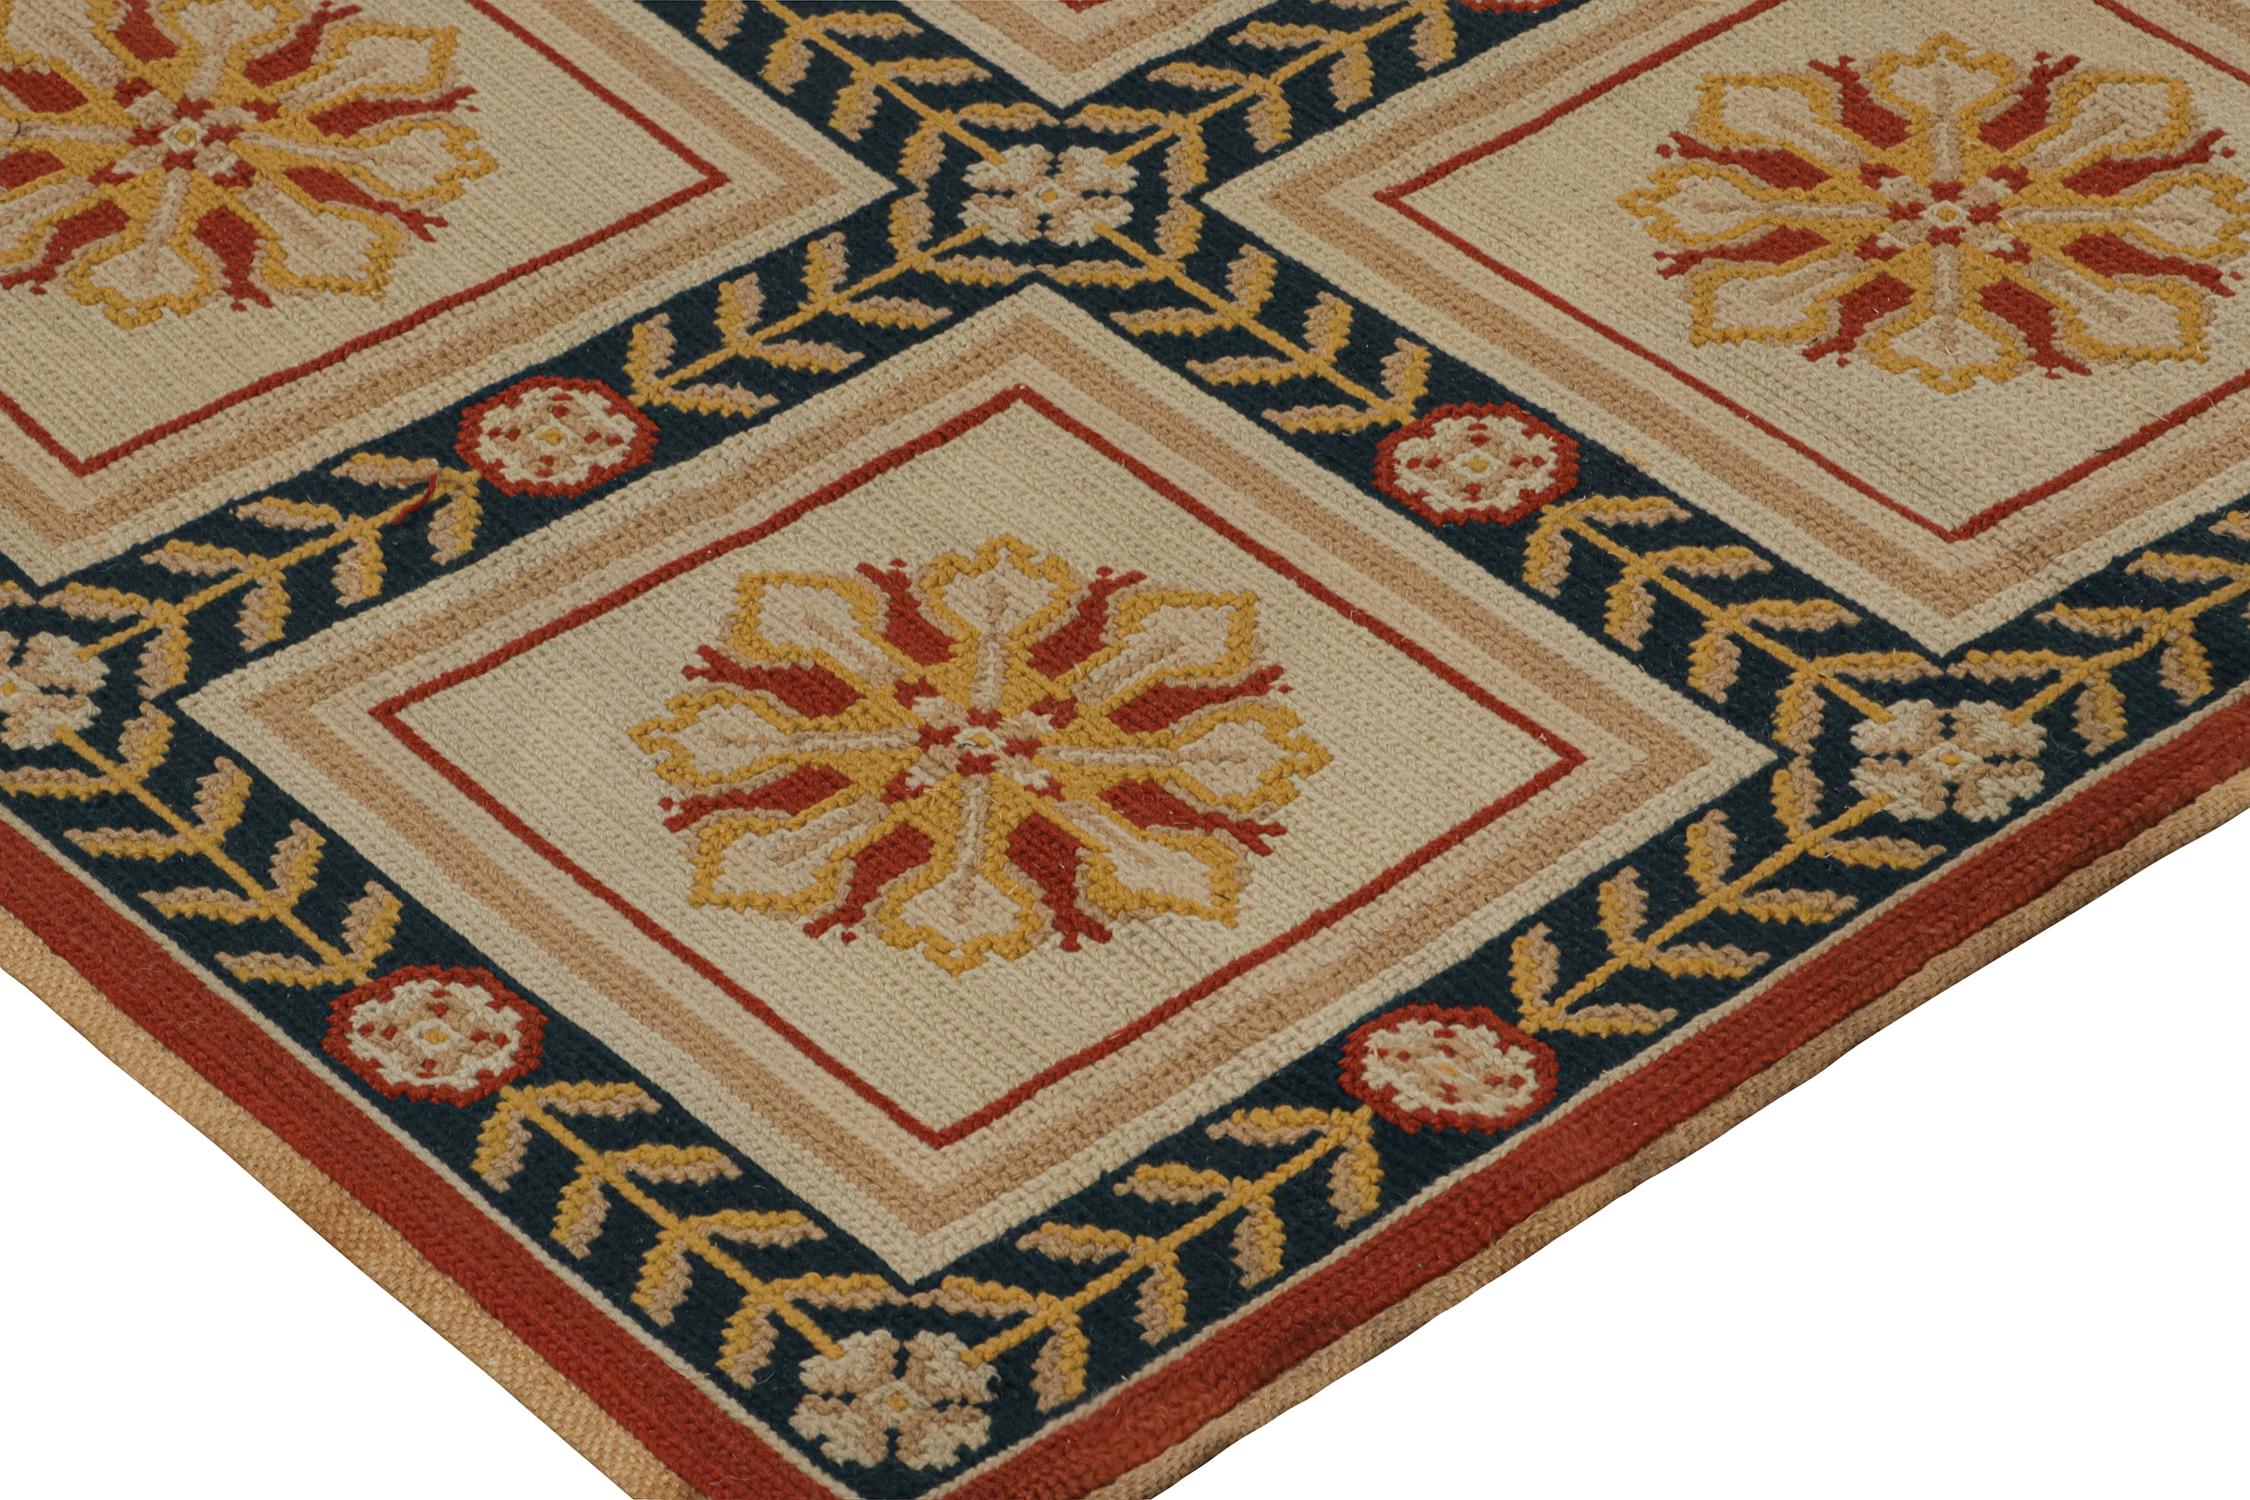 Vintage Arraiolos Needlepoint Runners in Beige Floral Medallions by Rug & Kilim In Good Condition For Sale In Long Island City, NY